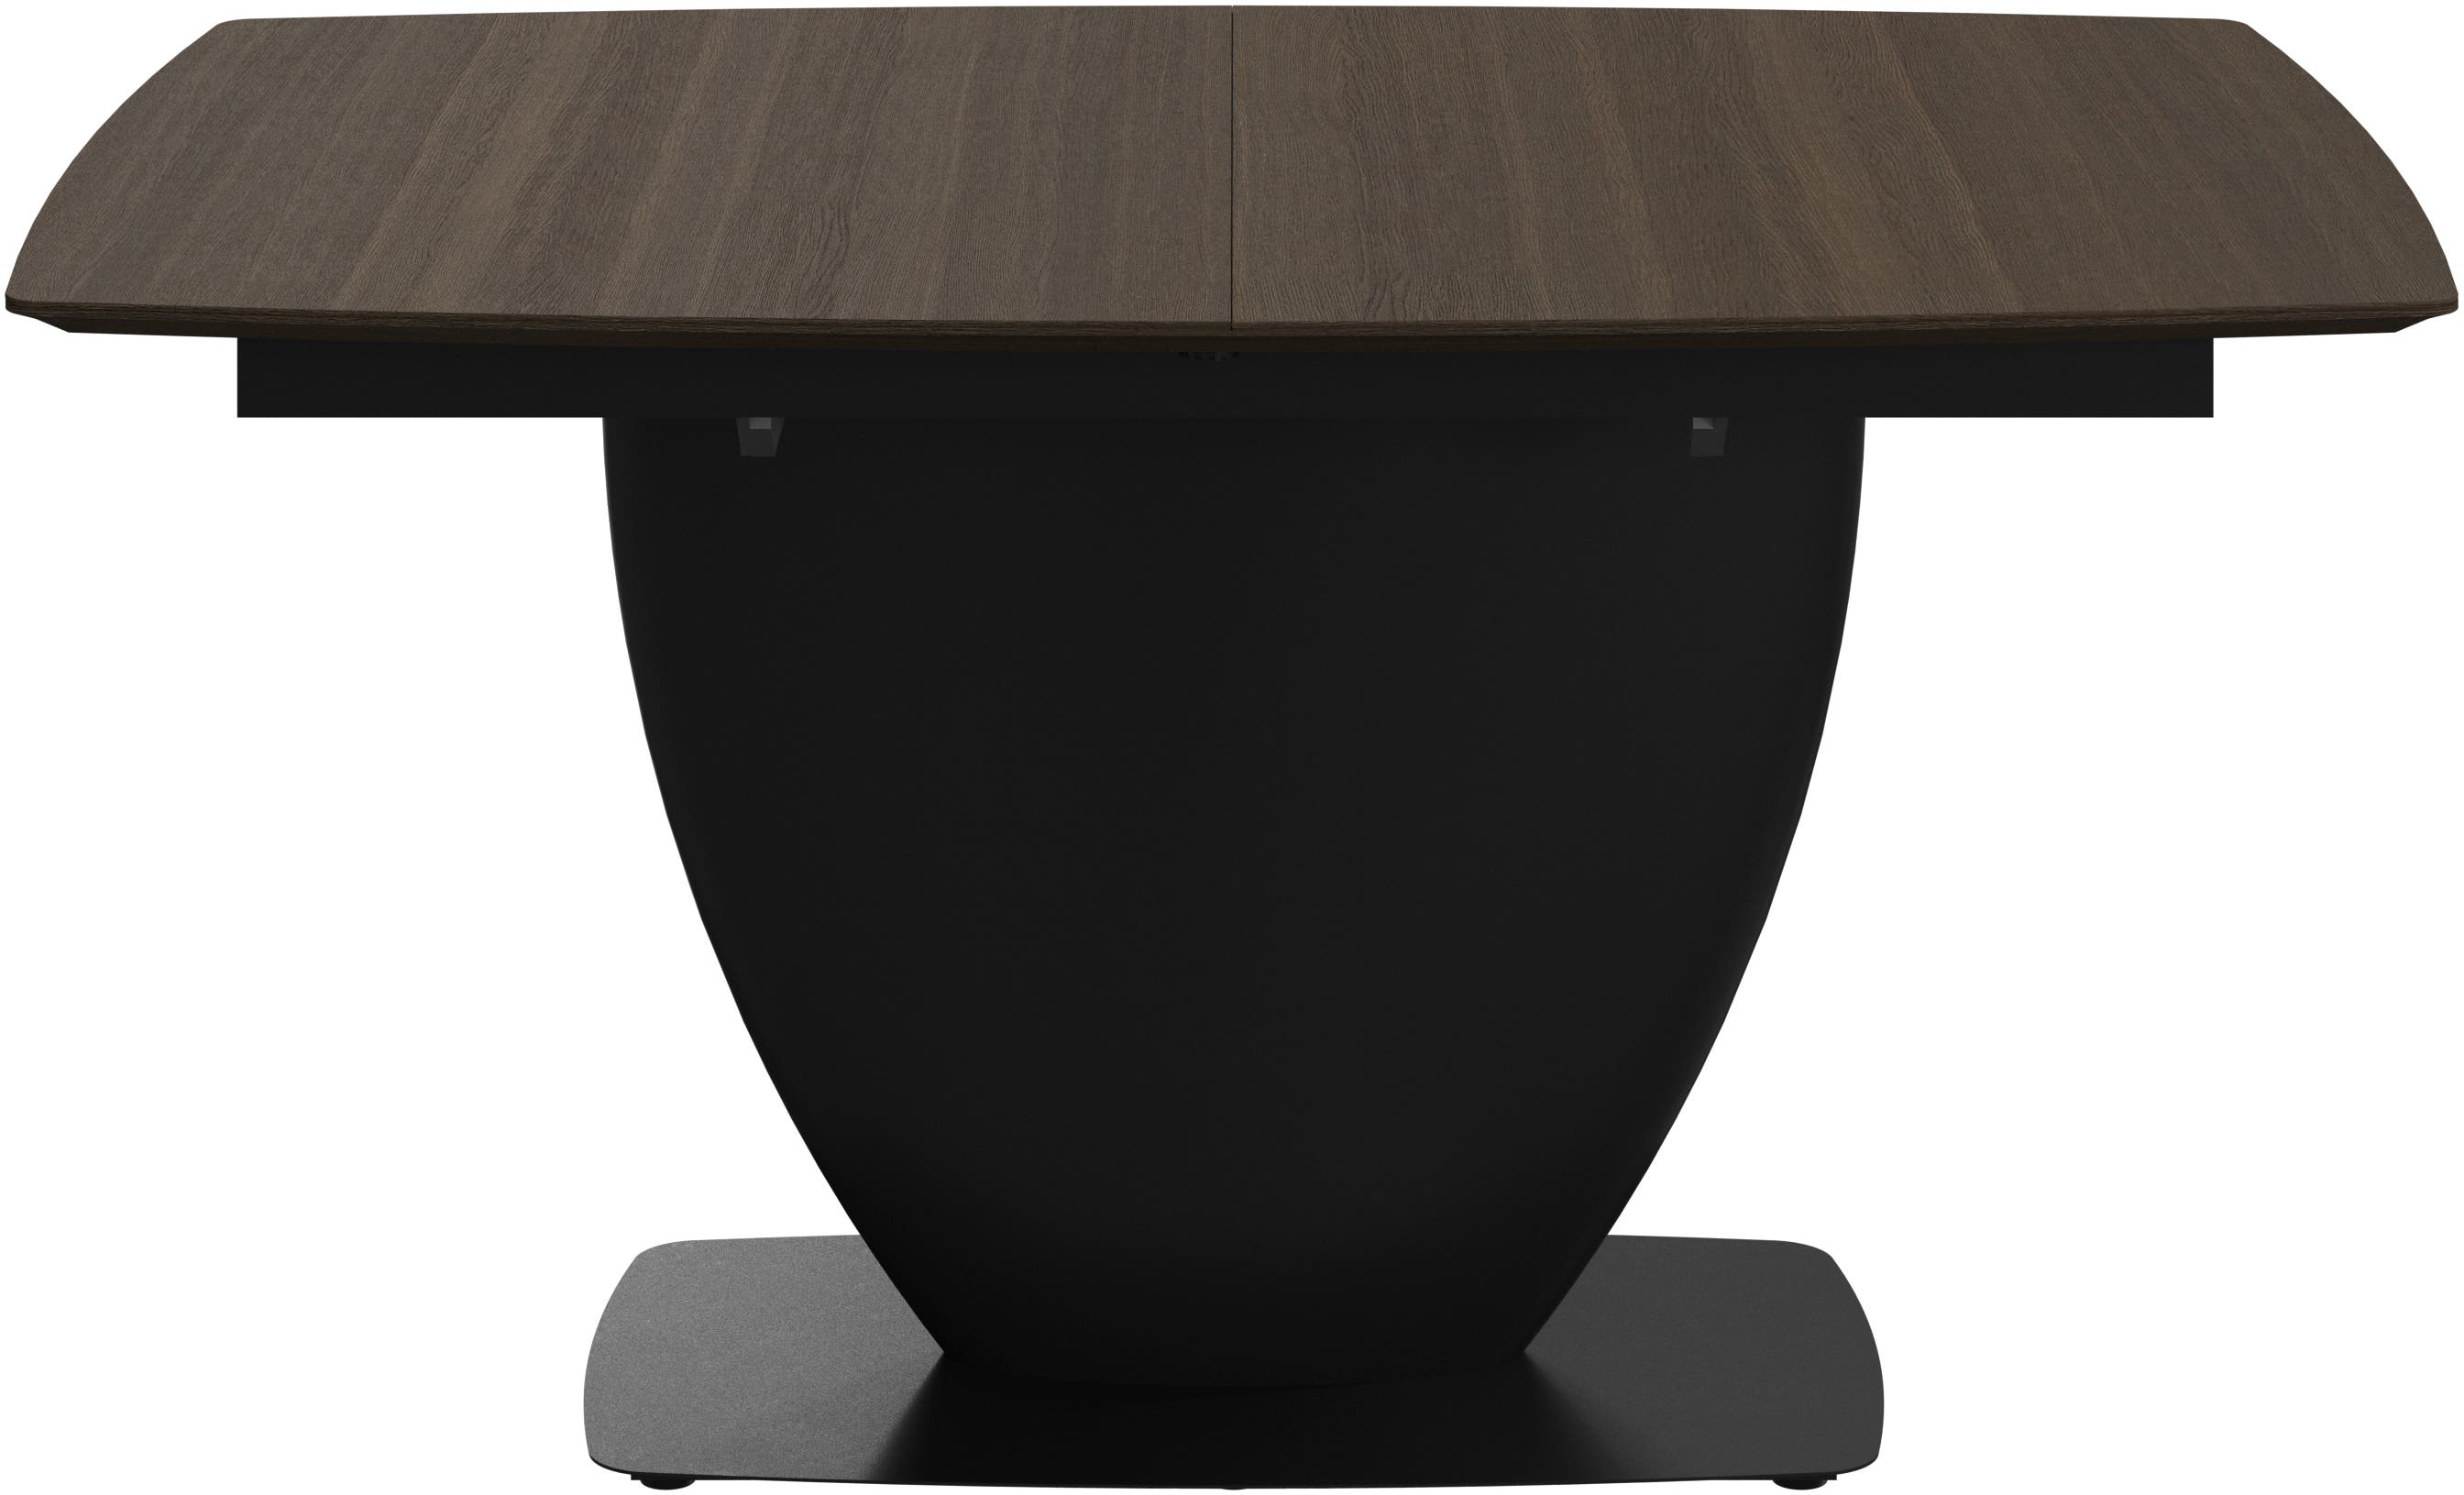 Fiorentina extendable dining table